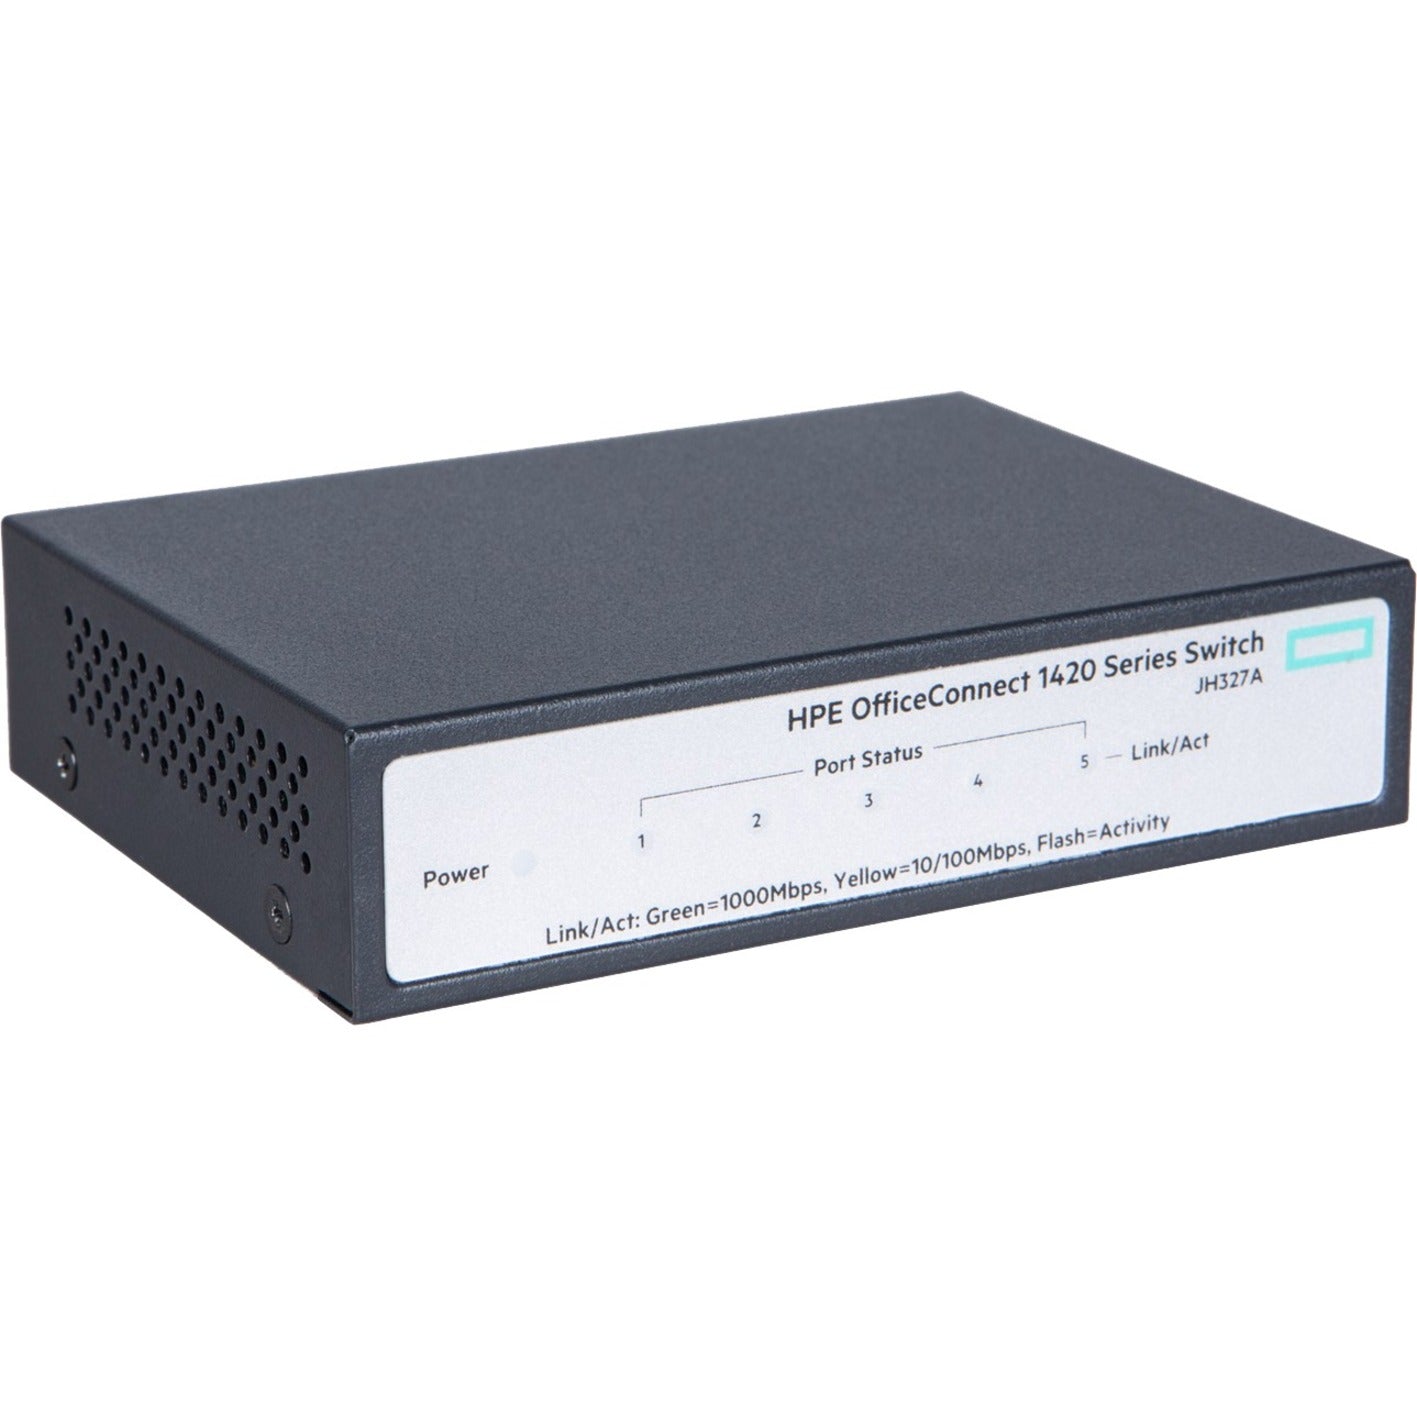 HPE OfficeConnect 1420 5G Switch, 5 Gigabit Ethernet Network Ports, Gigabit Ethernet, Twisted Pair